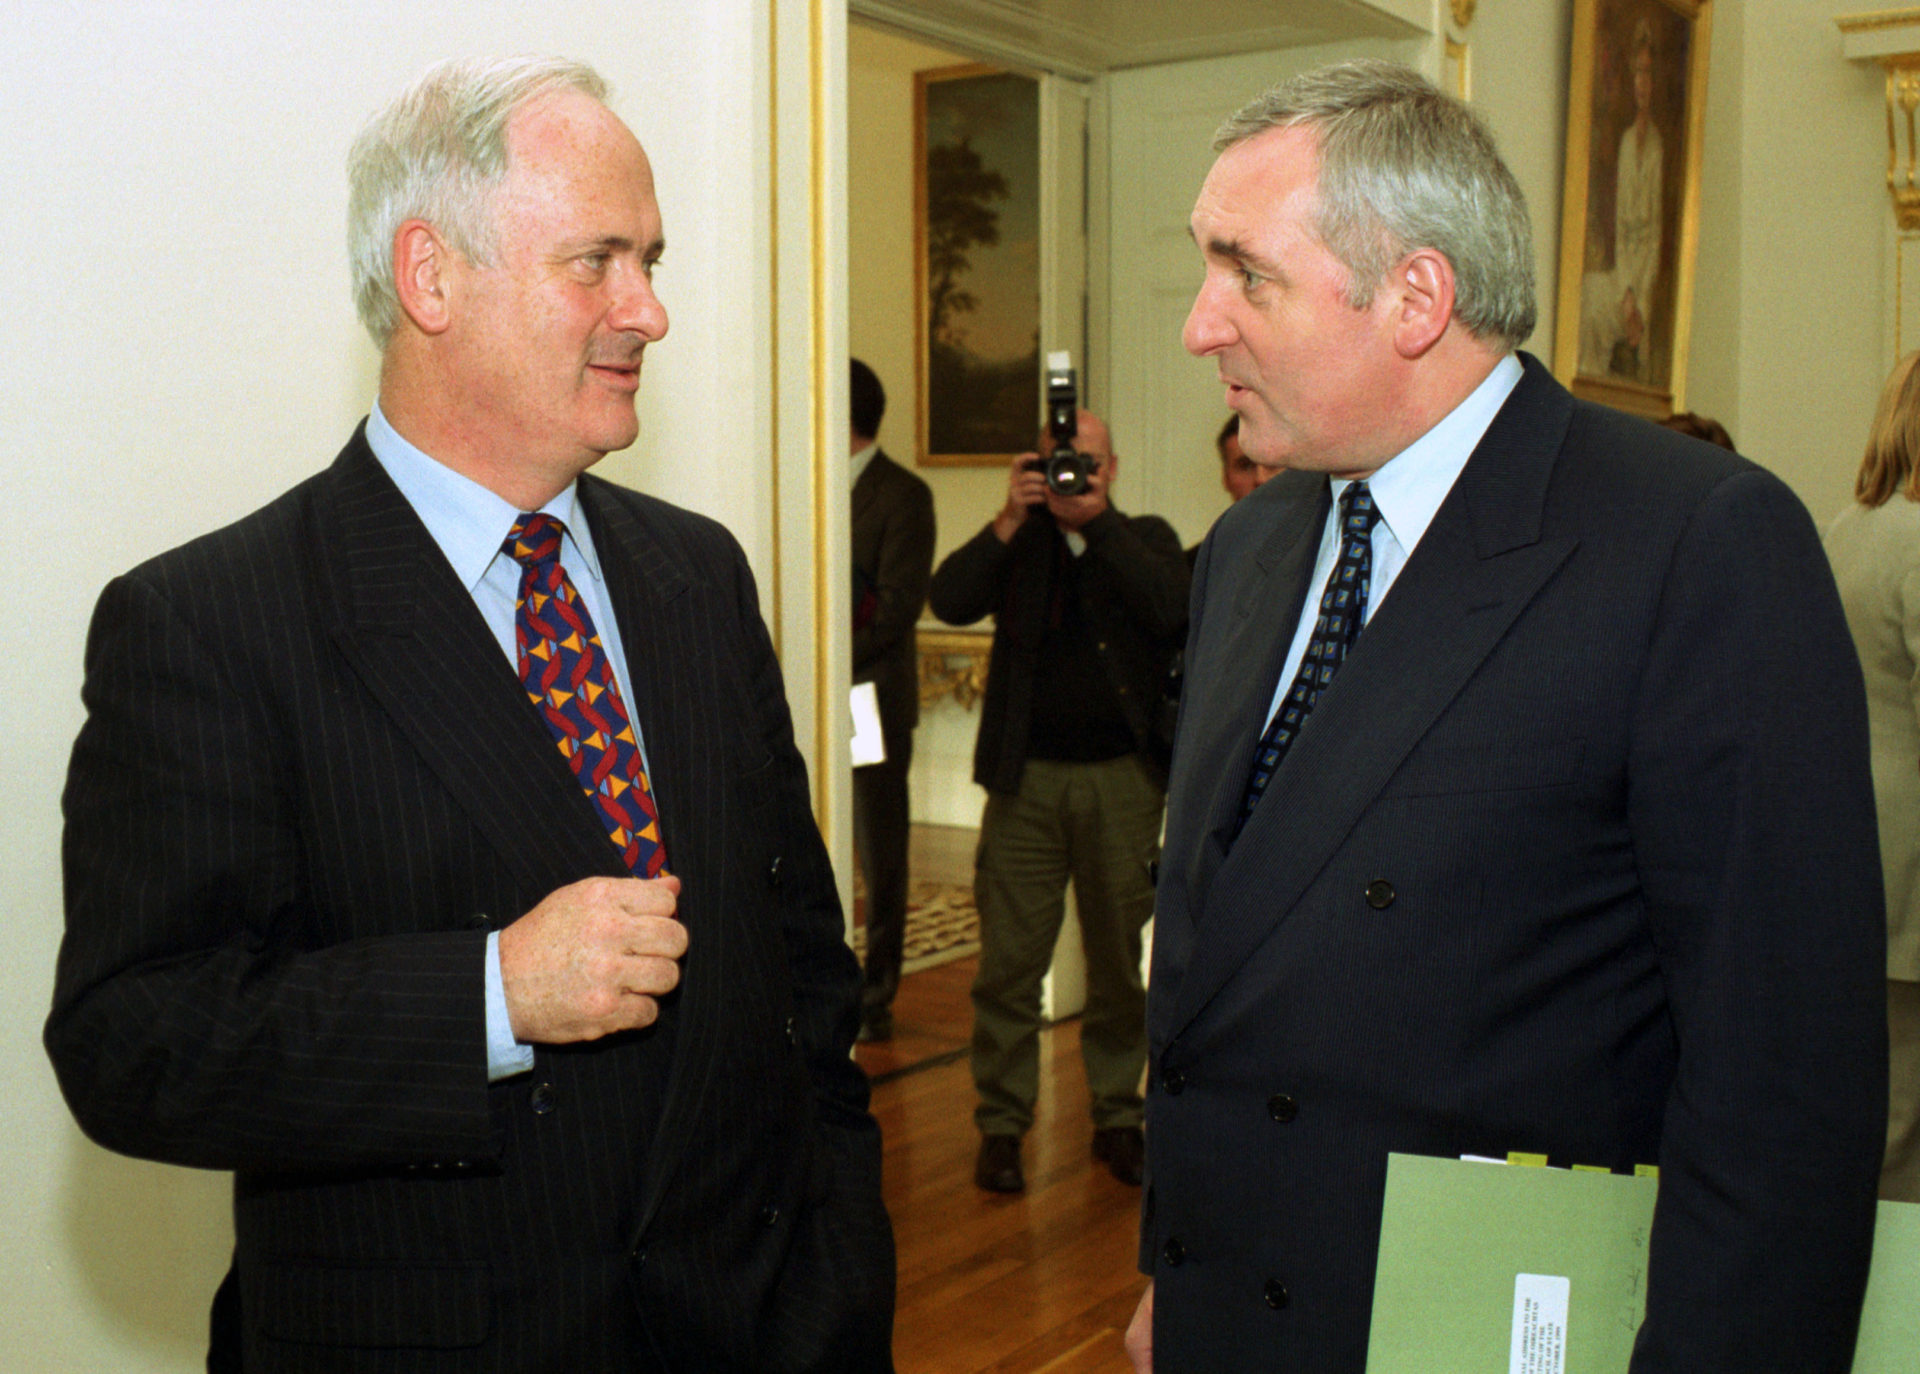 File photo shows John Bruton talking to Bertie Ahern before a meeting of the Council of State at Aras an Uachtaráin , 28-10-99